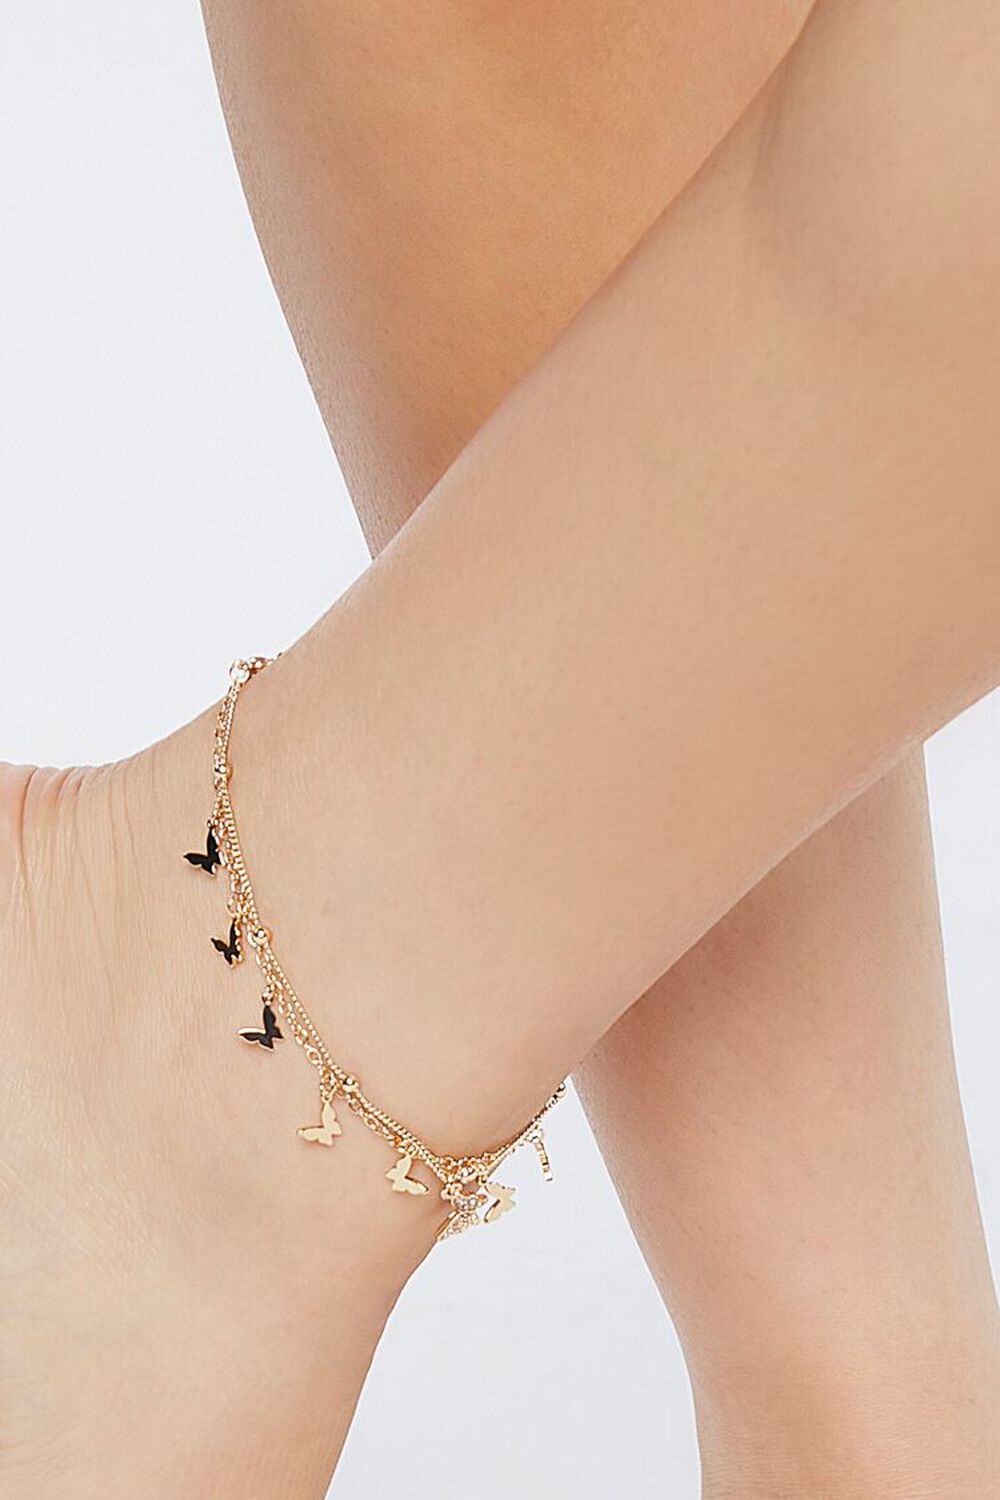 GOLD Butterfly Charm Chain Anklet Set, image 1